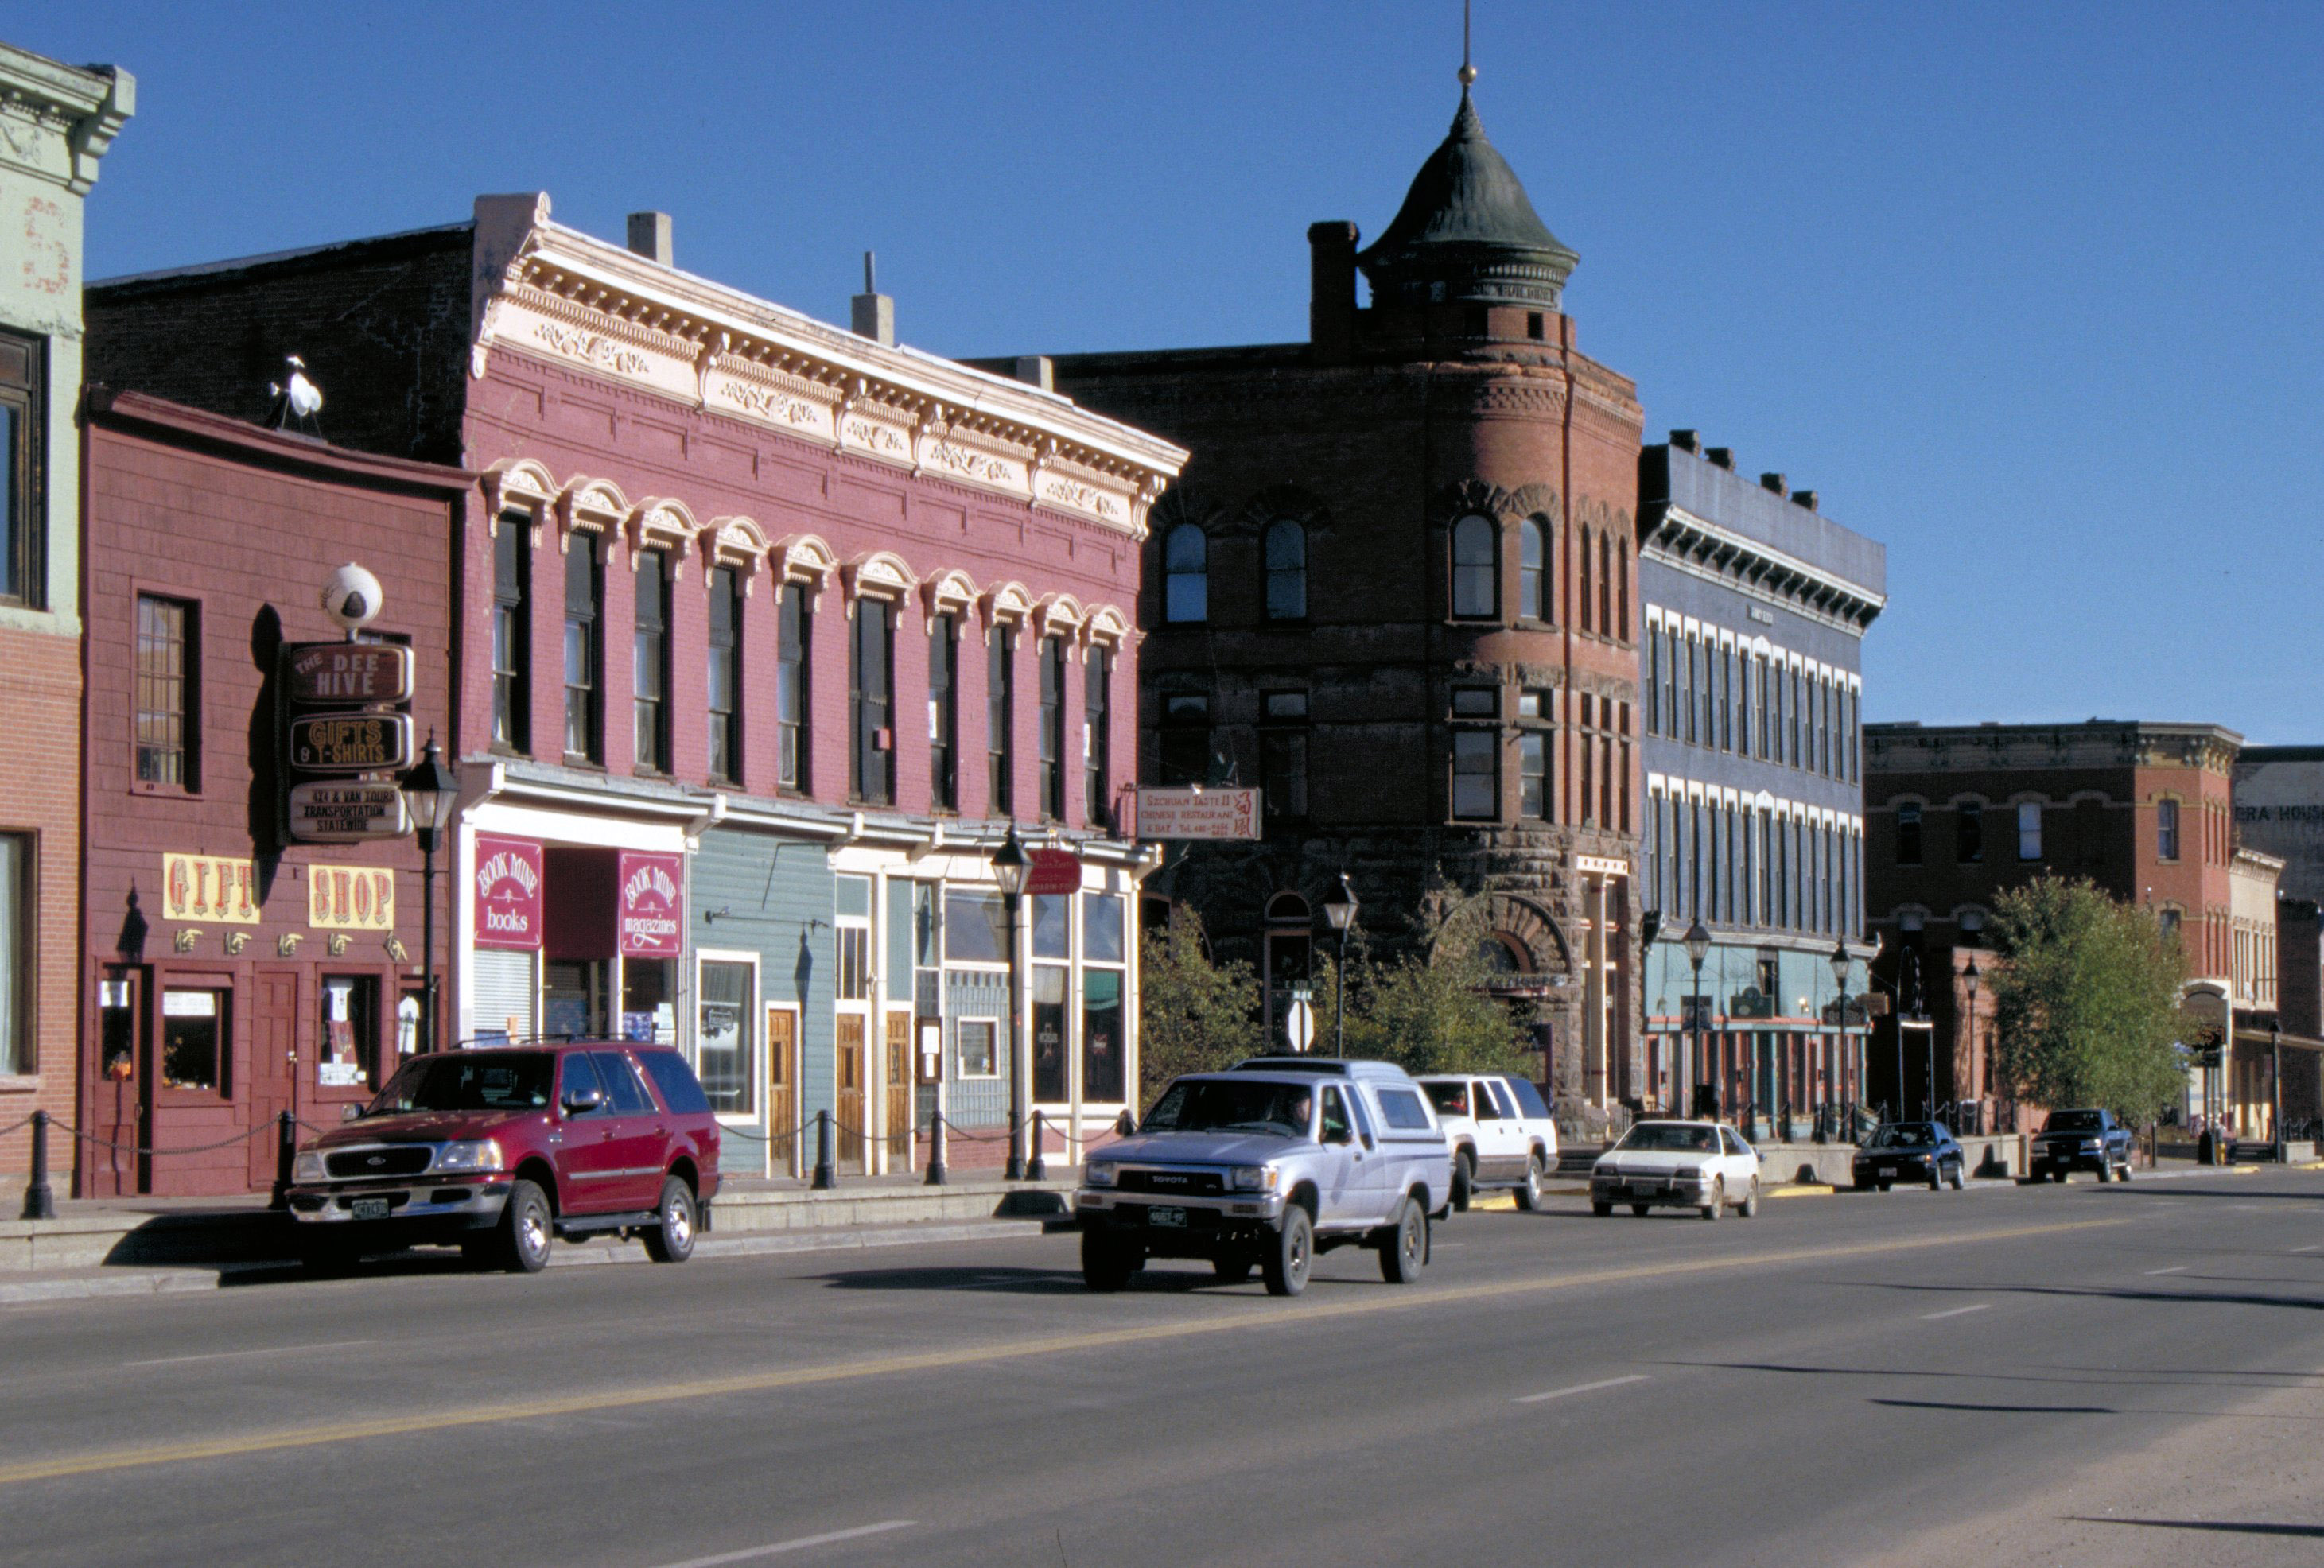 Downtown Leadville buildings and street in Colorado image - Free stock ...